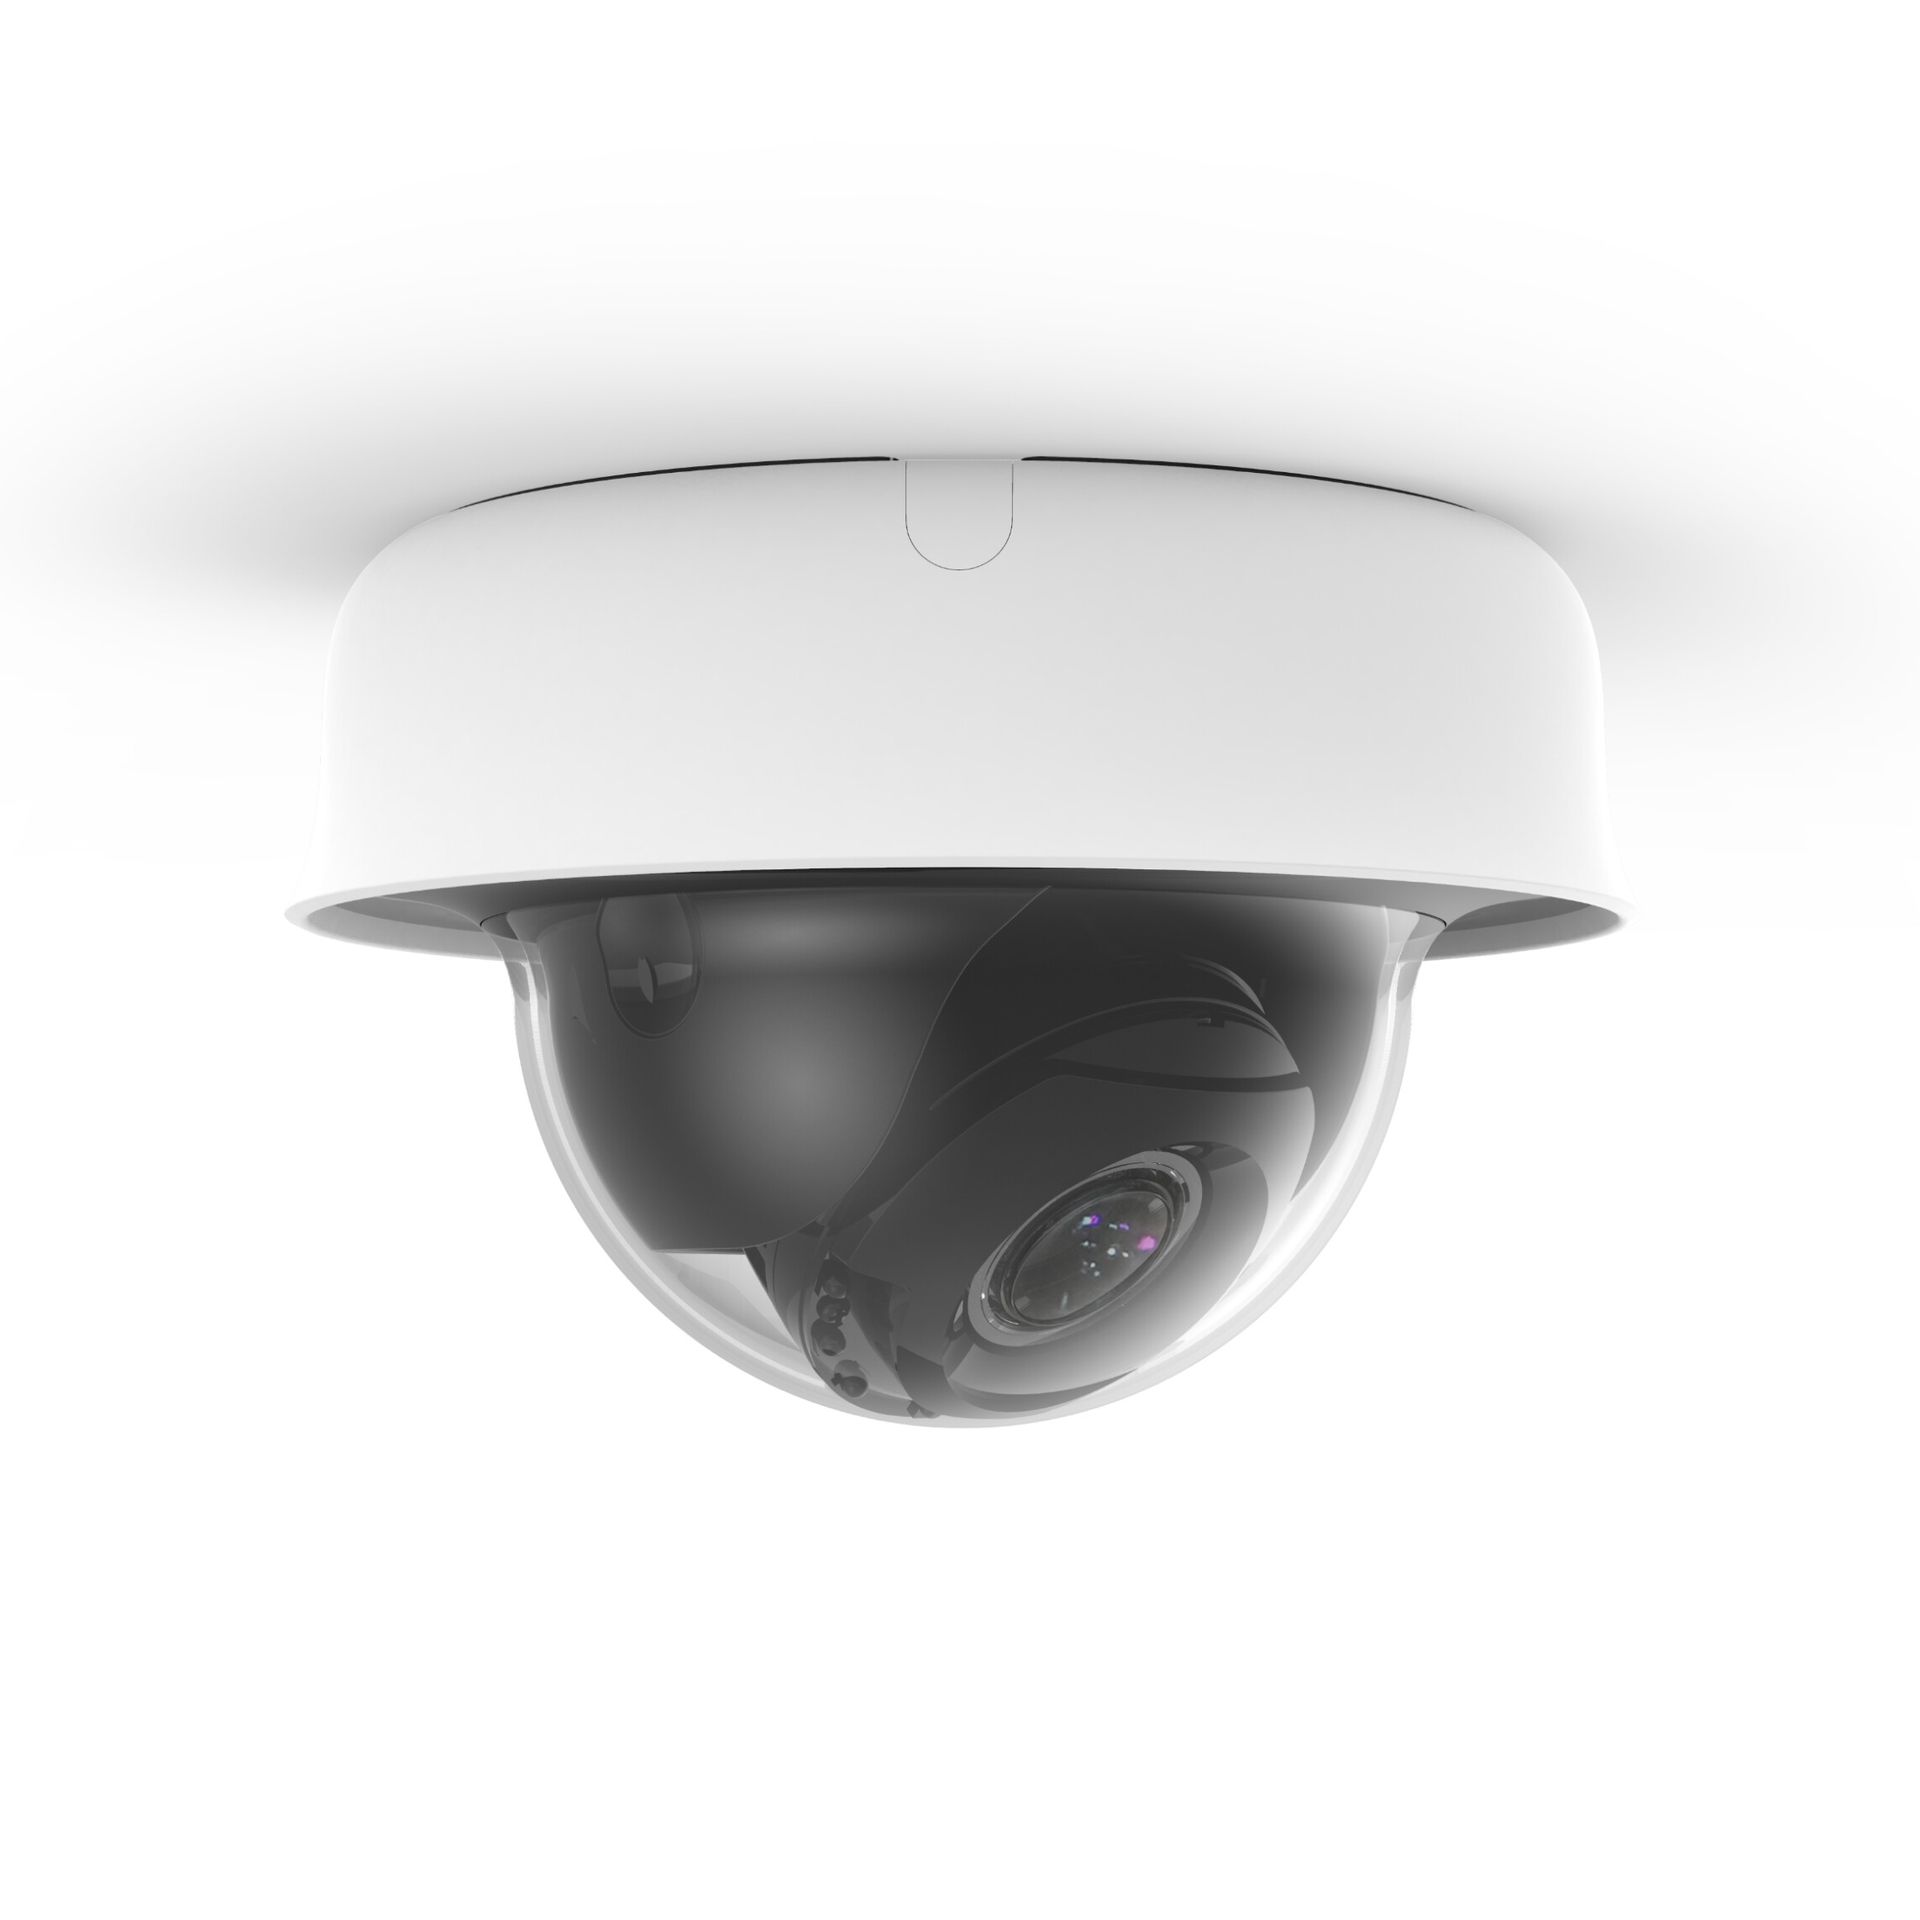 The MV22 smart camera mounted to the ceiling via its white base. The black camera is visible inside its clear dome covering.